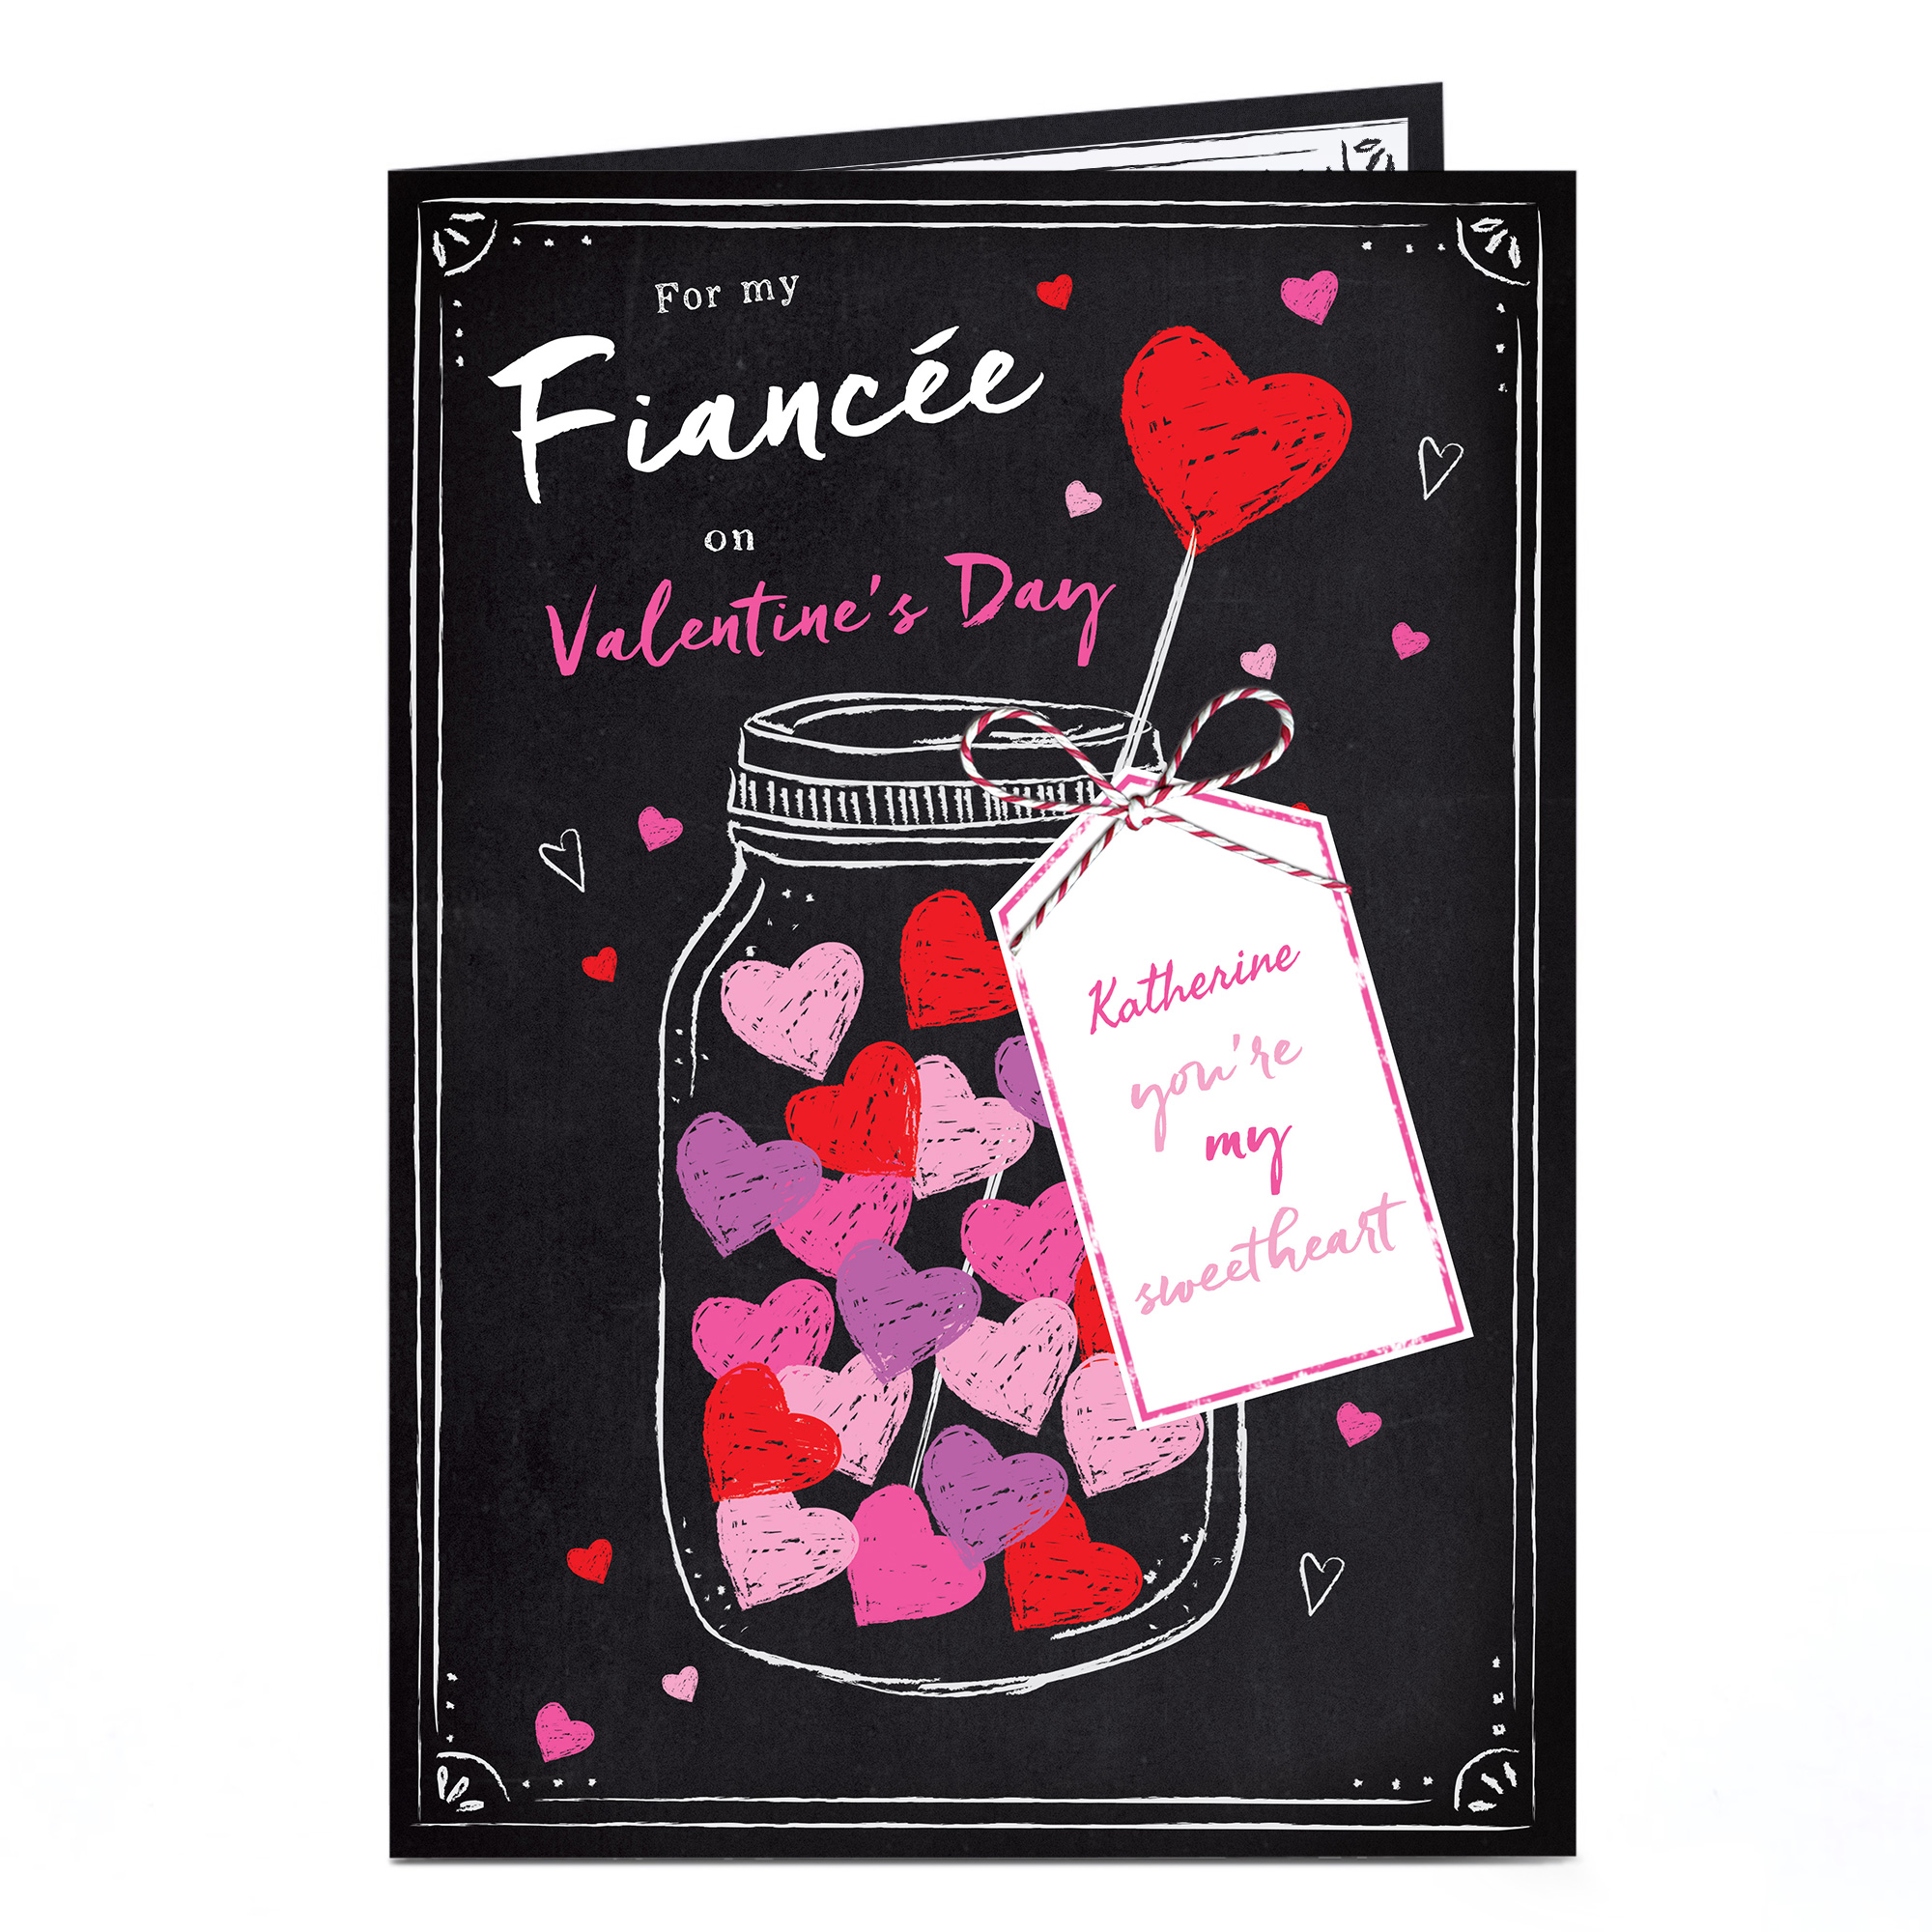 Personalised Valentine's Card - Fiancee, You're My Sweetheart